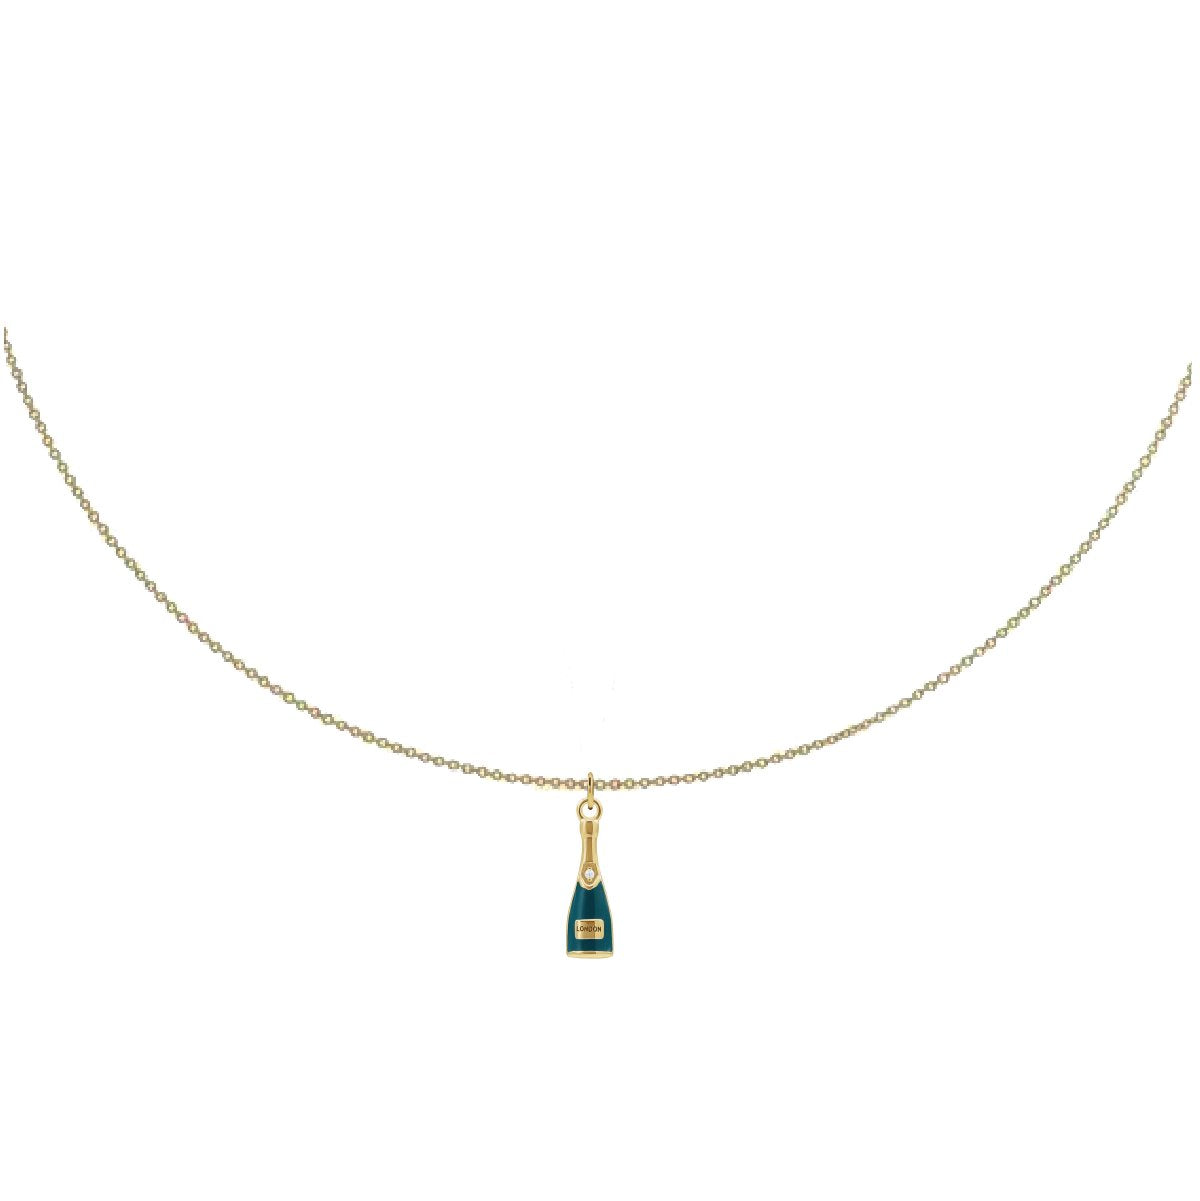 Charm Collection - For the Party Girl Robyn Canady Charm + 14K Gold Filled Chain None 